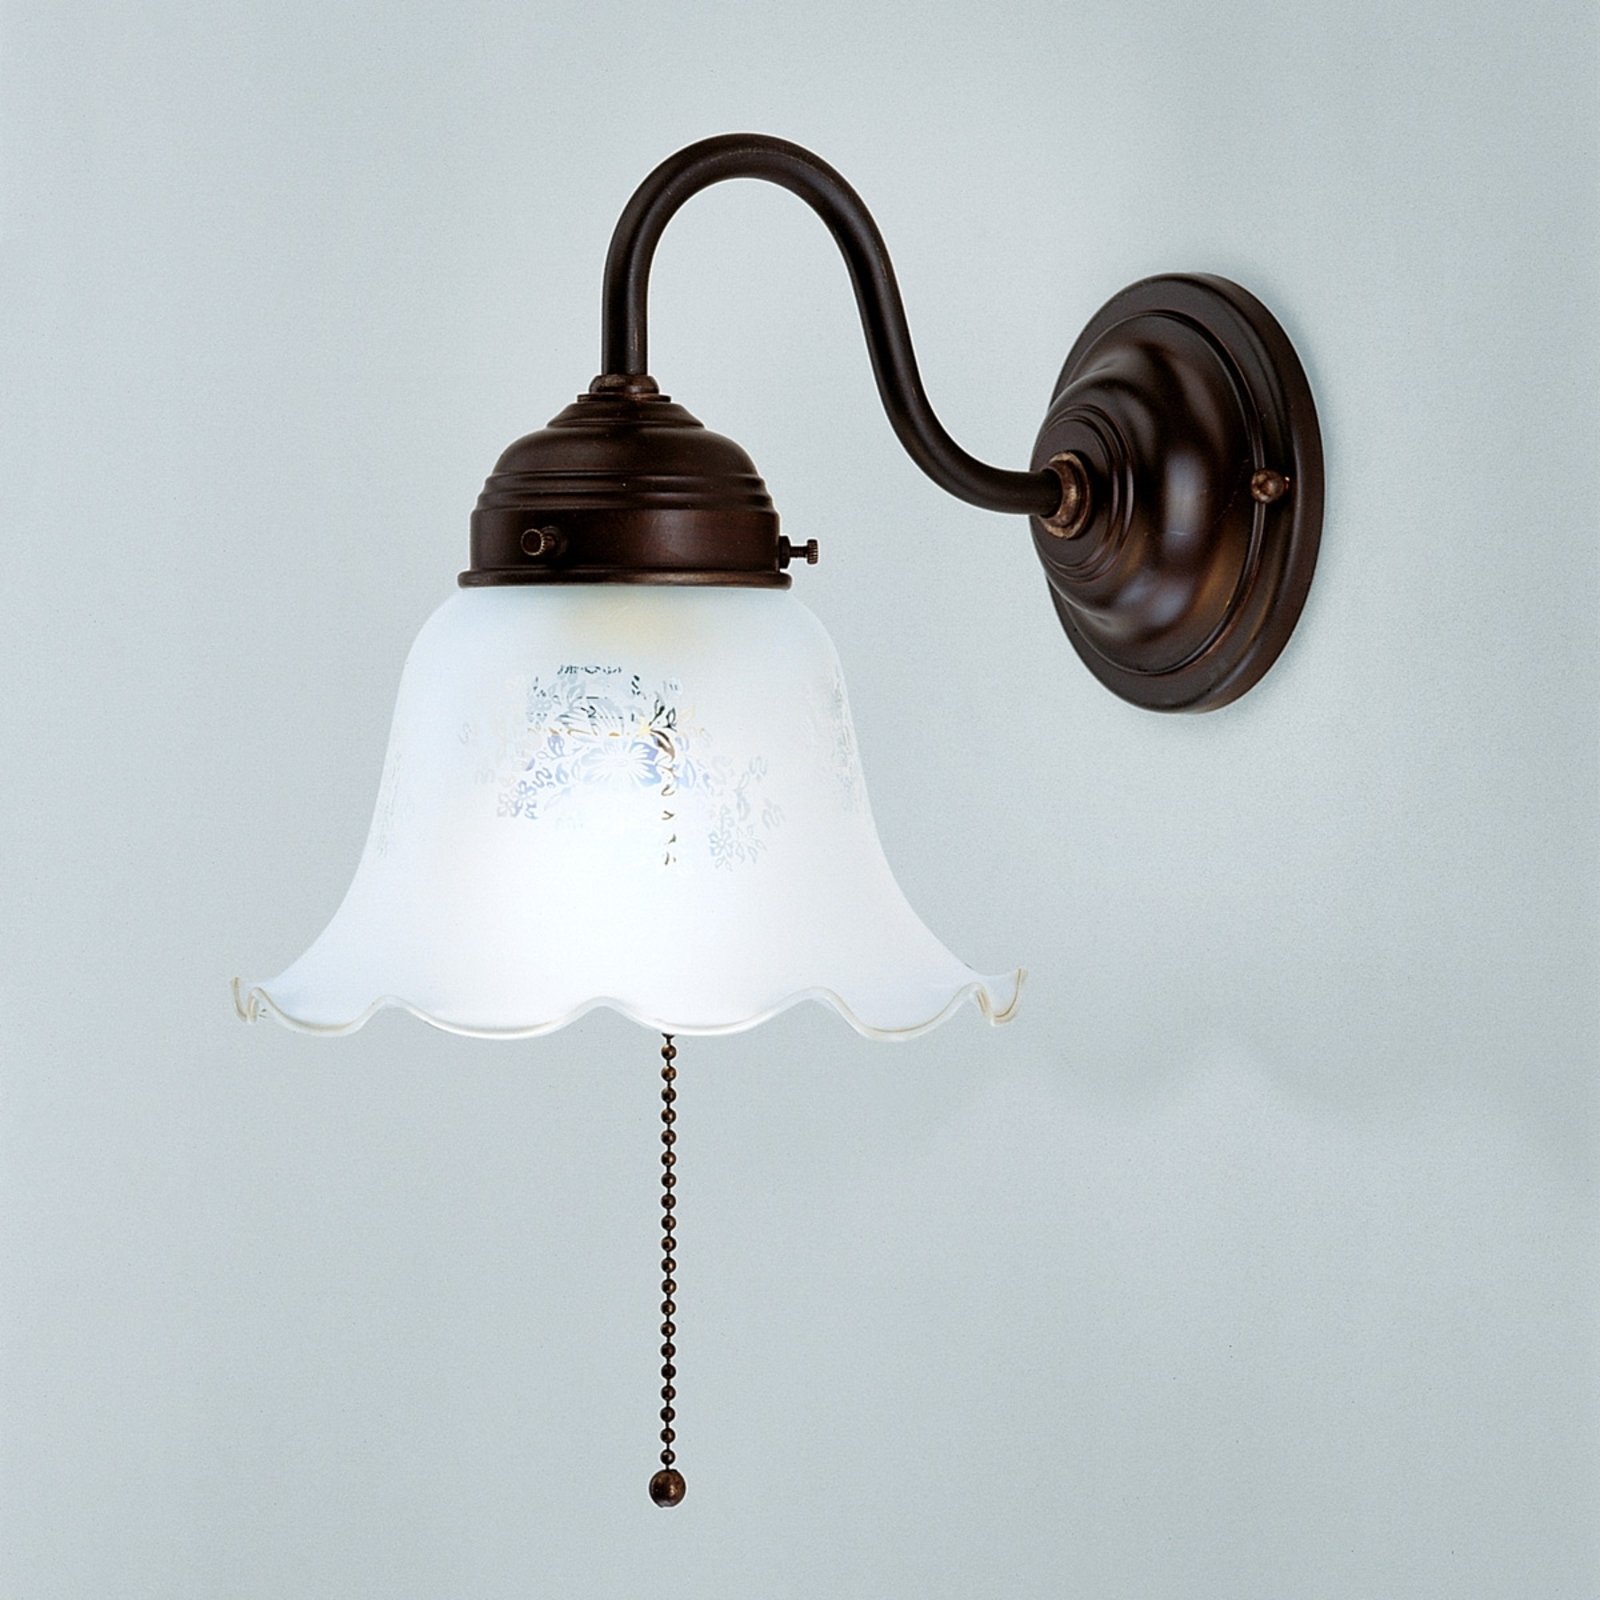 Gretchen wall light with antique mount